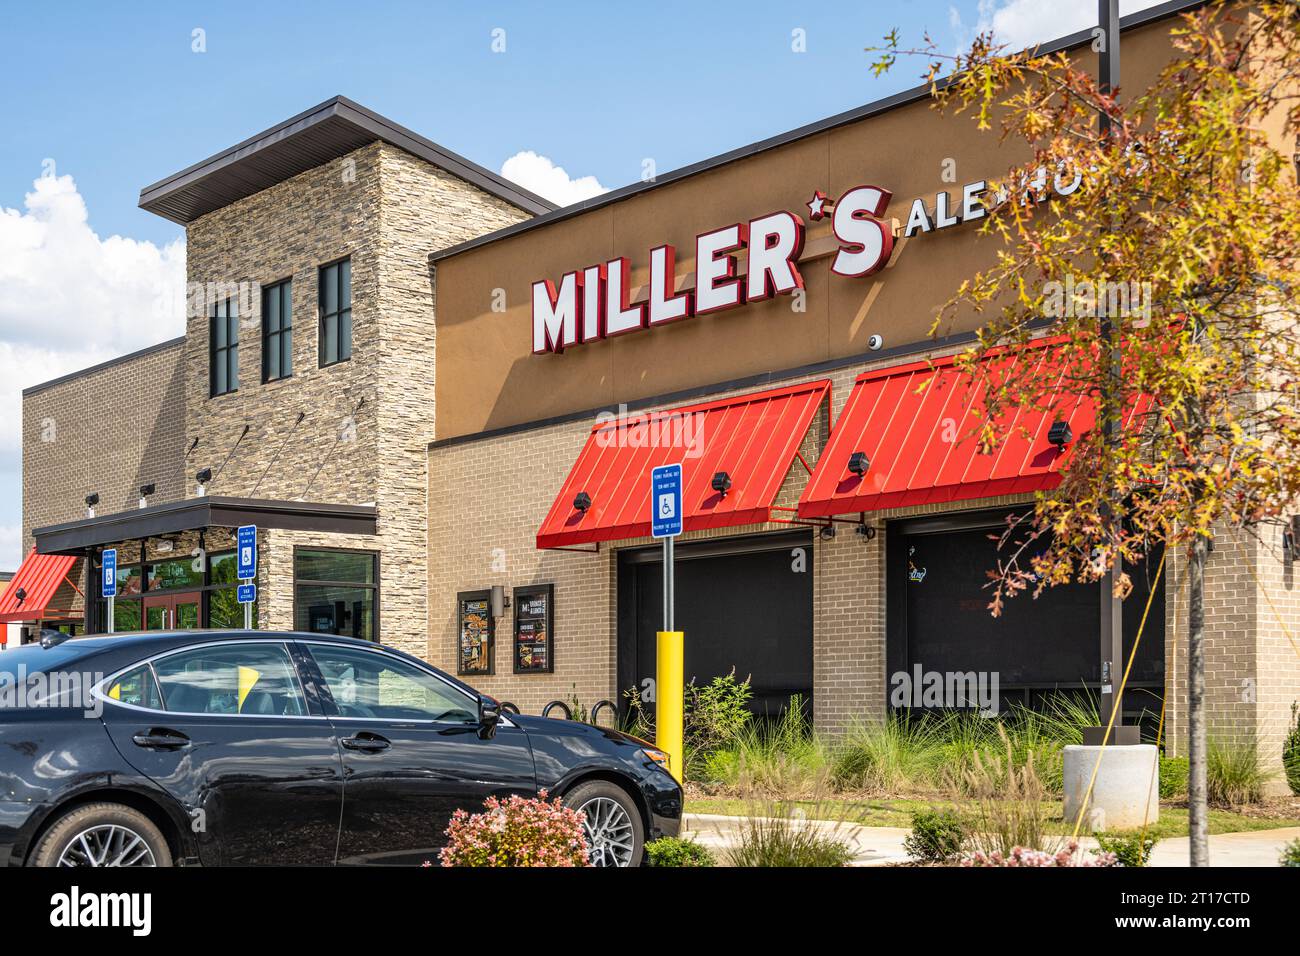 Miller's Ale House casual dining restaurant and sports bar in Snellville, Georgia. (USA) Stock Photo